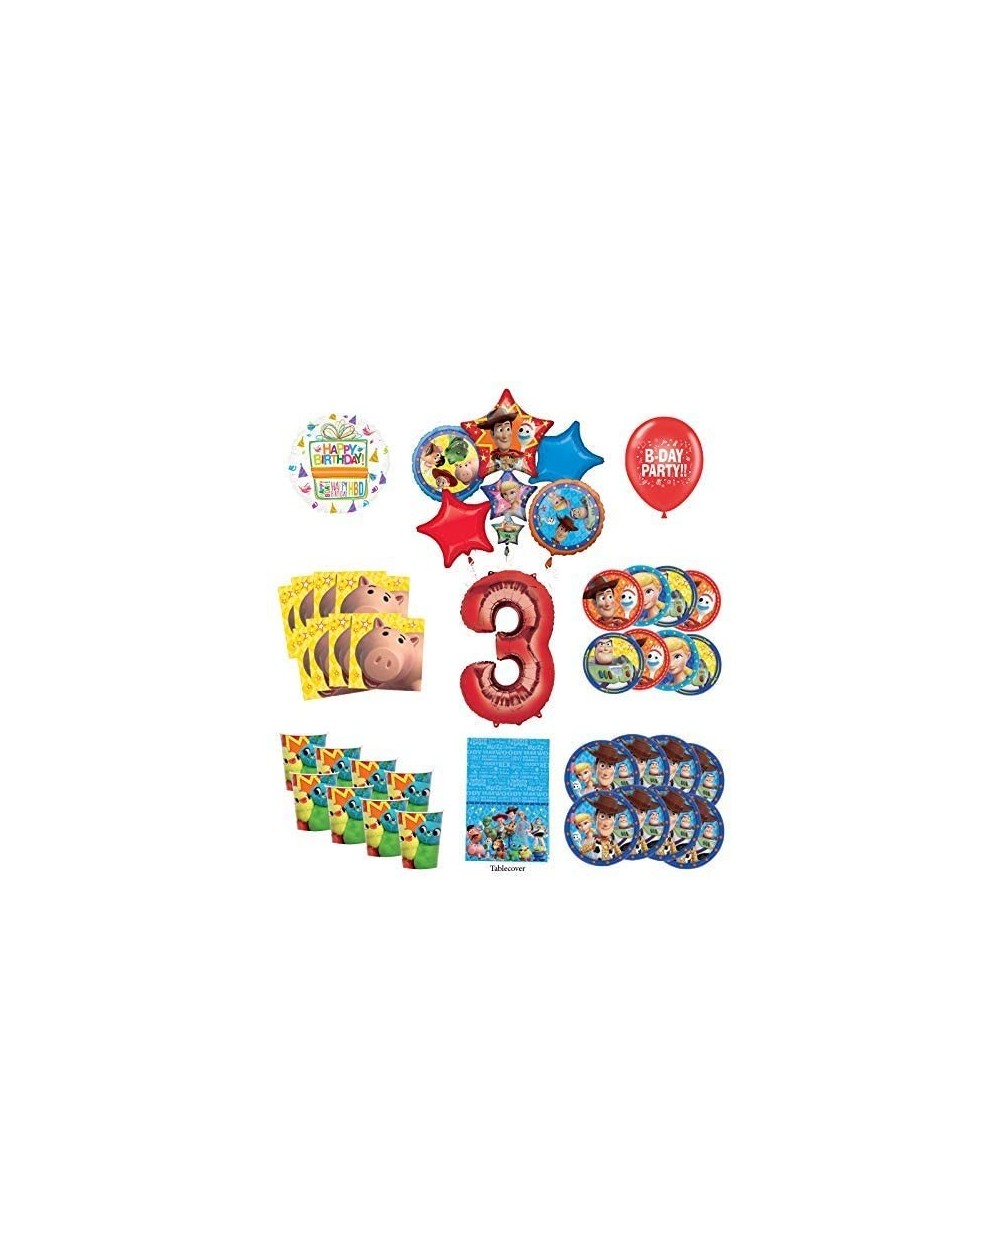 Balloons 3rd Birthday Party Supplies 8 Guest Decoration Kit with Woody- Buzz Lightyear and Friends Balloon Bouquet - C218SL6Q...